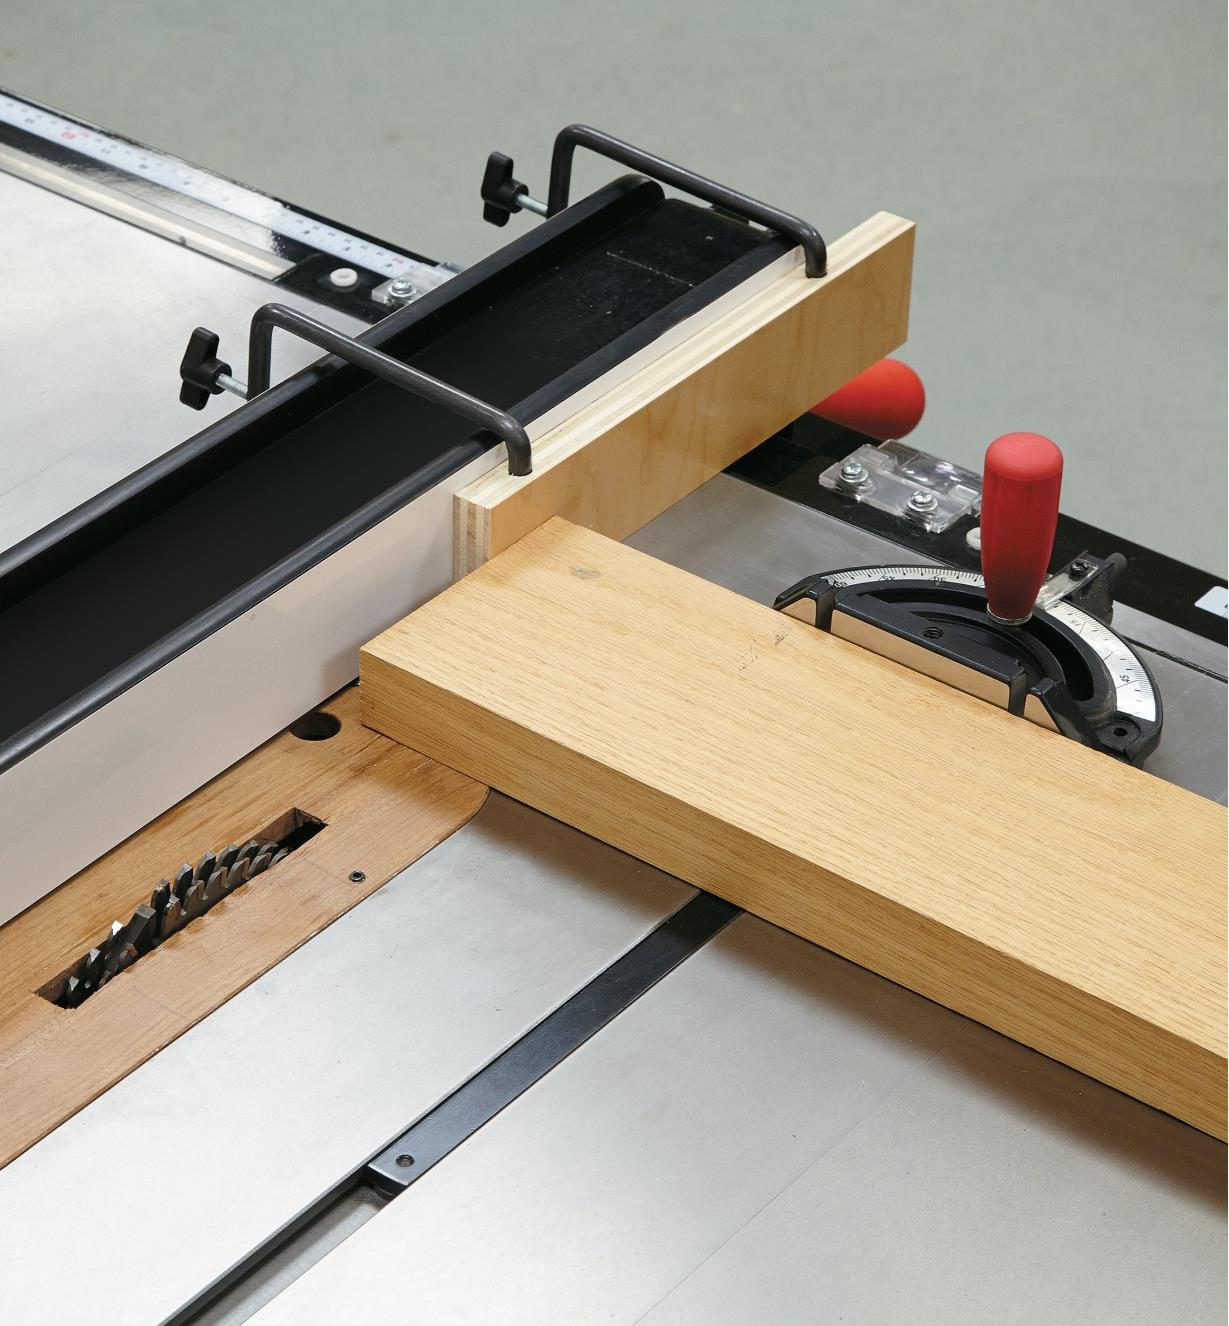 Mounting Clamps holding an auxiliary fence on a table saw